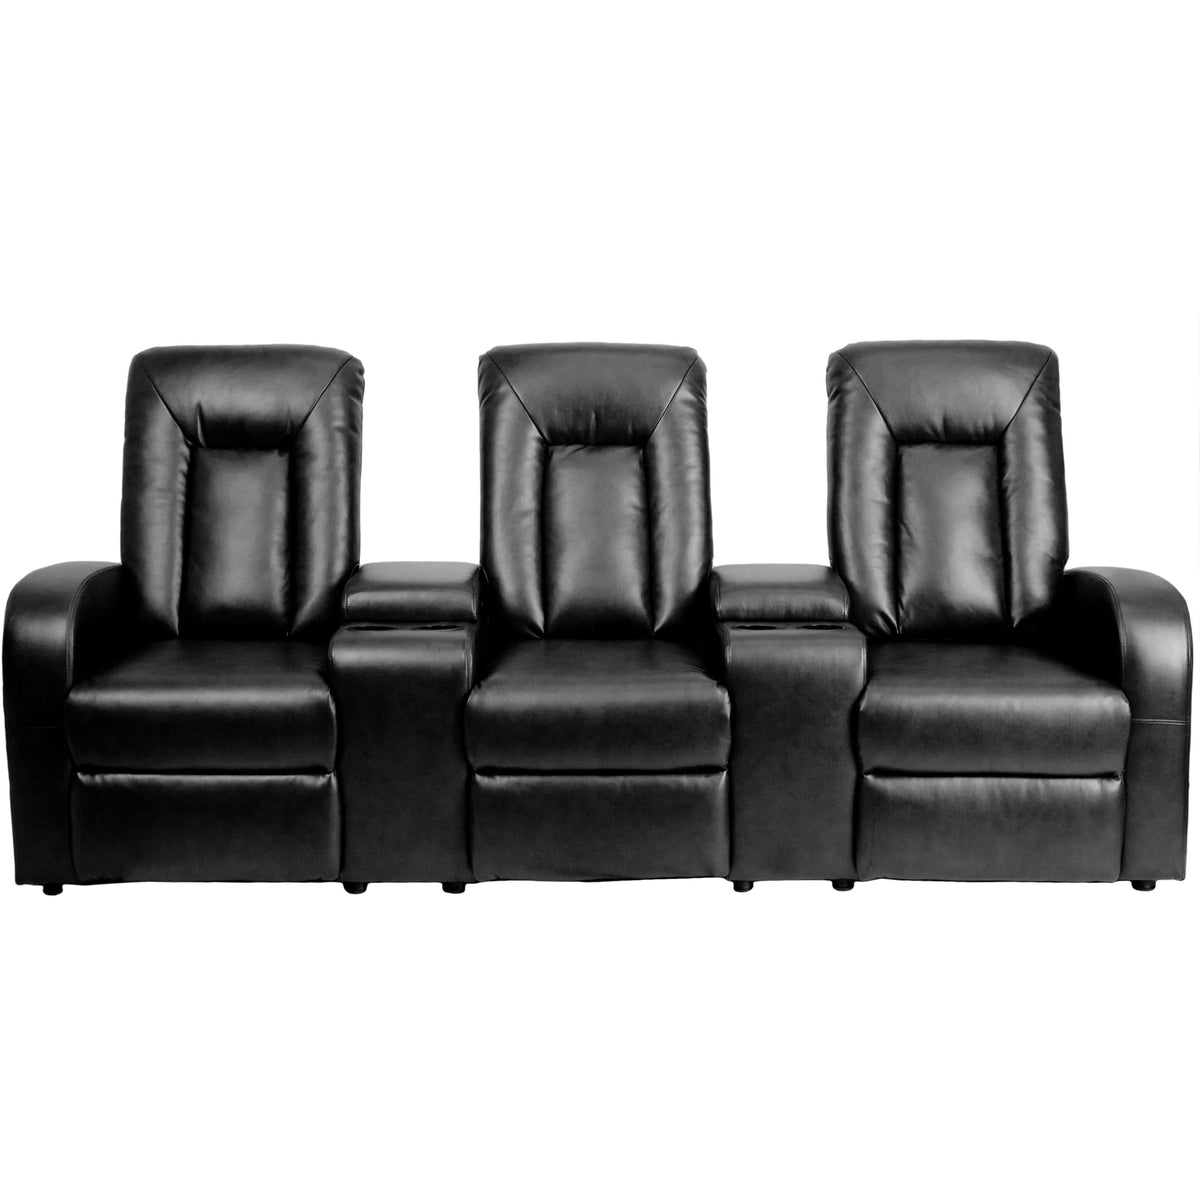 Black |#| 3-Seat Push Back Reclining Black LeatherSoft Theater Seating Unit w/Cup Holders